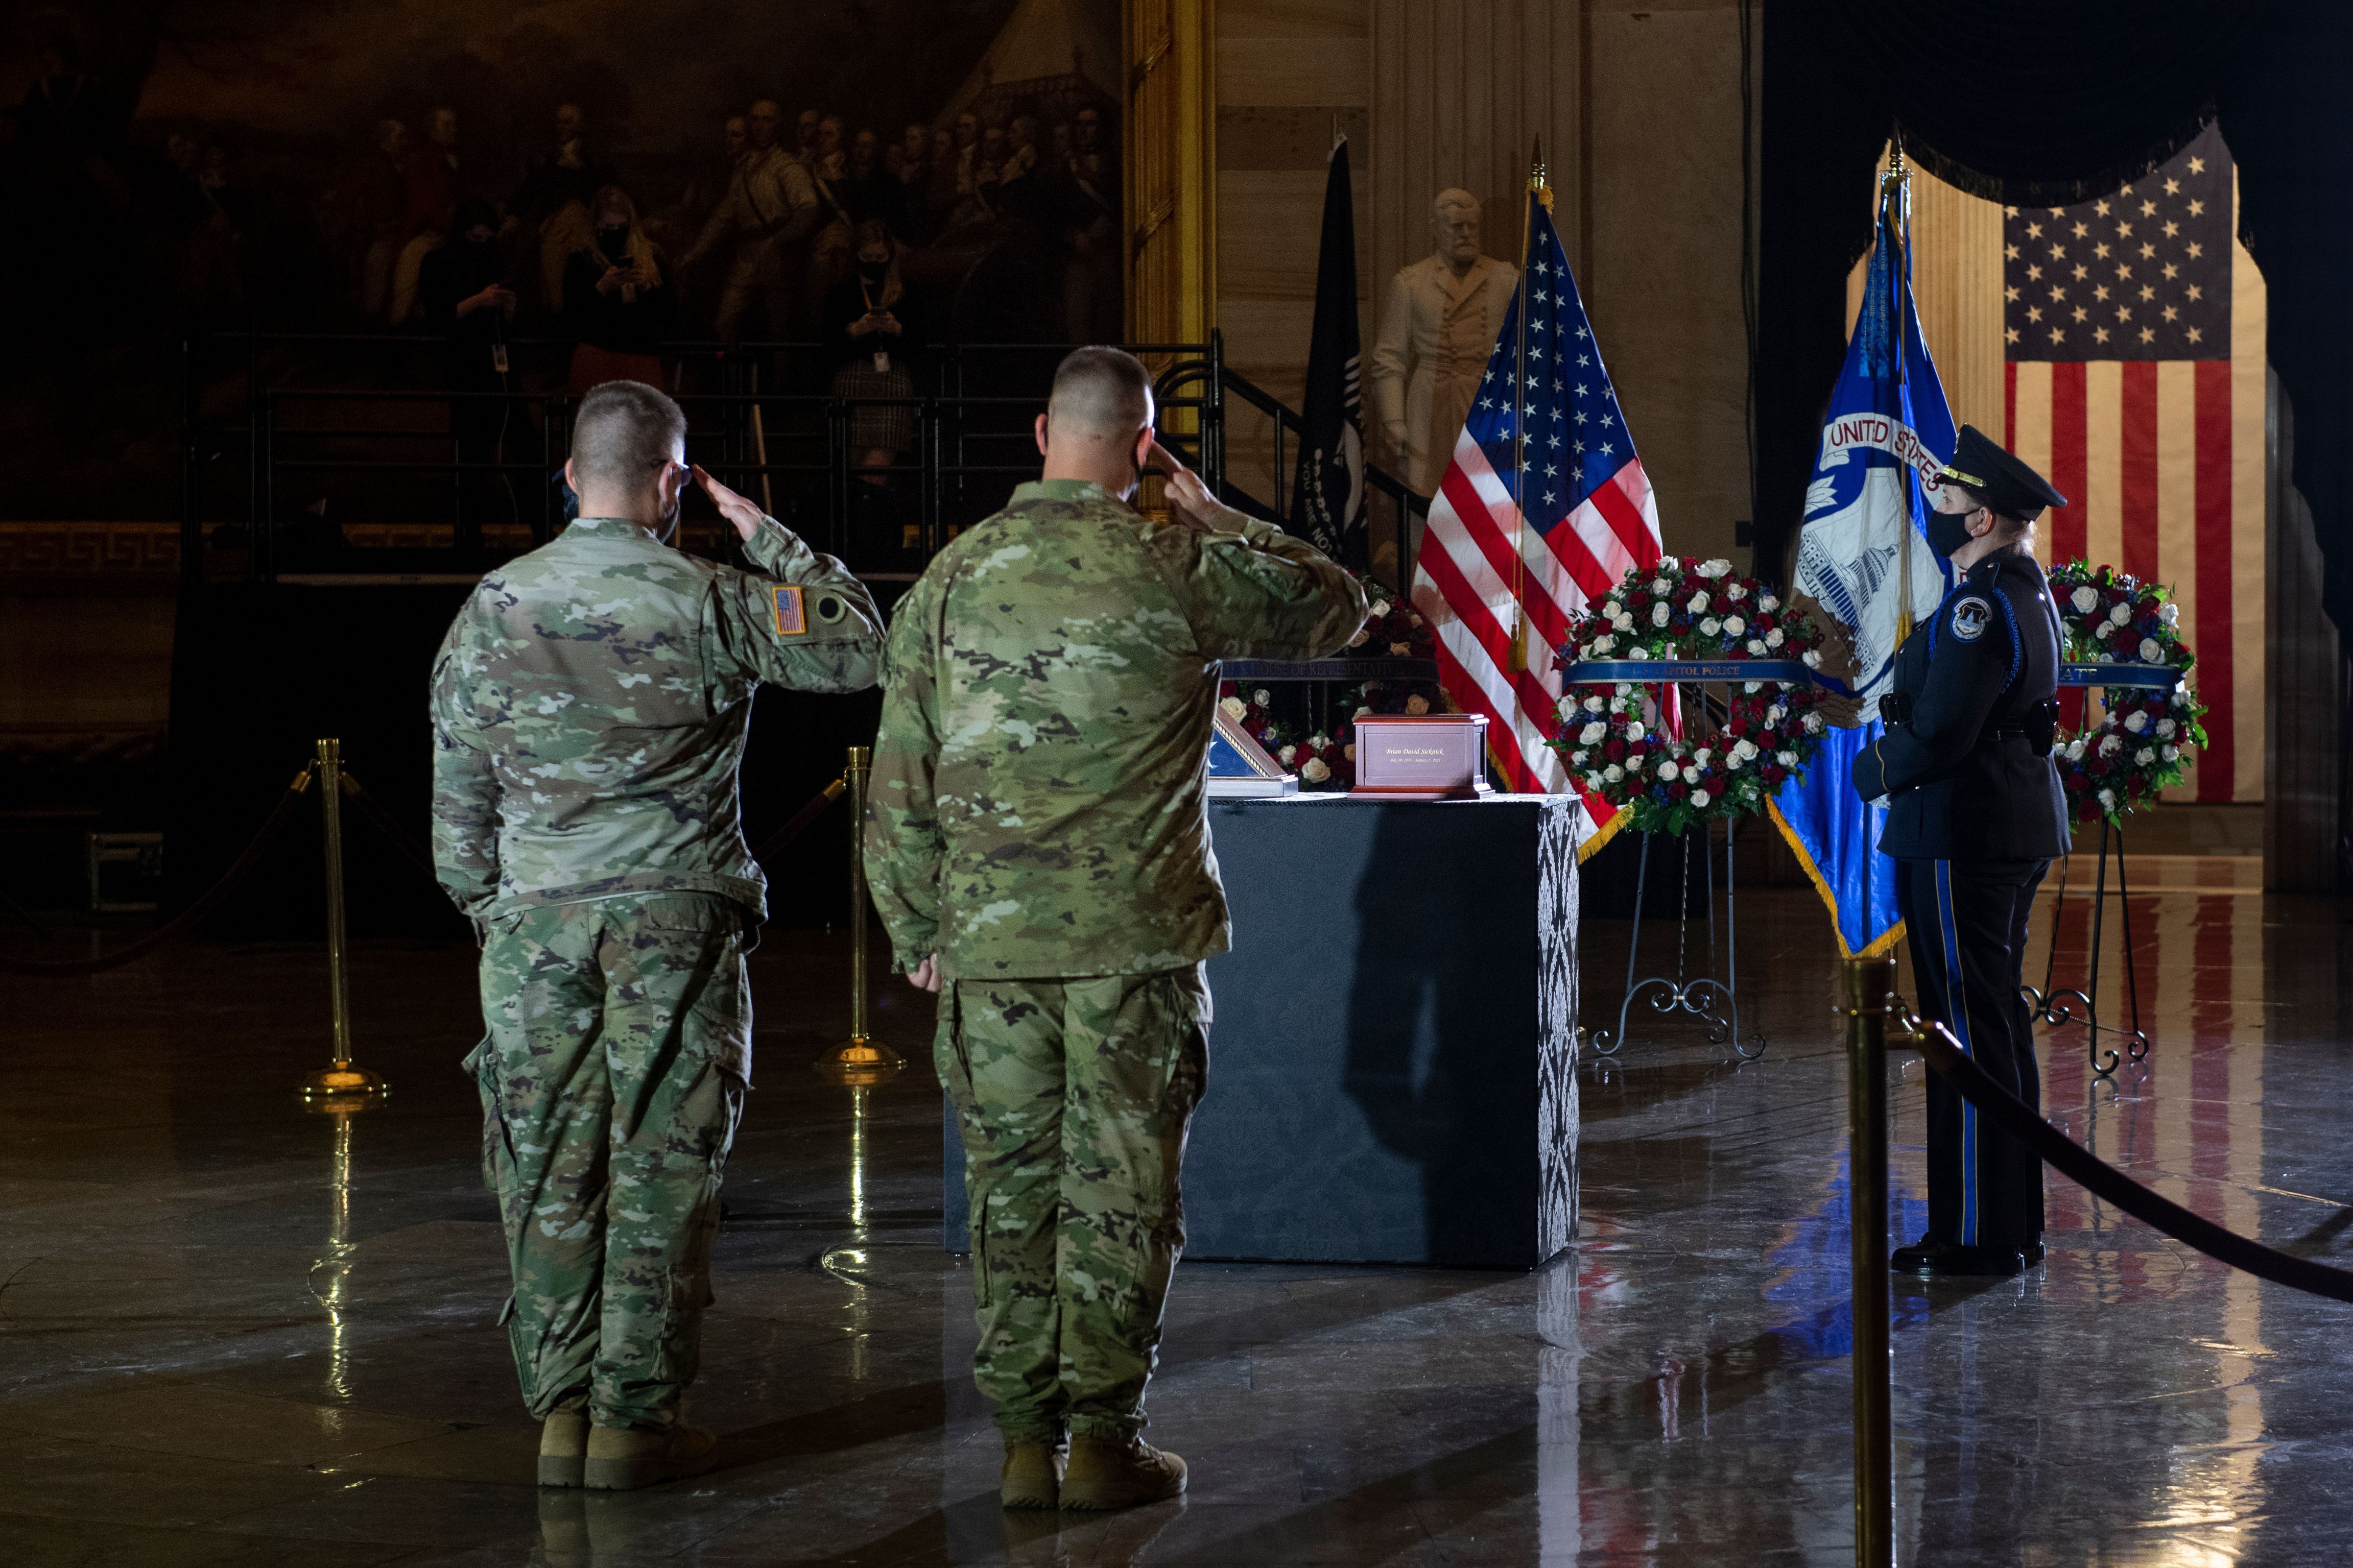 Members of the National Guard salute as they pay their respects late US Capitol Police officer Brian Sicknick as he lies in honor in the US Capitol Rotunda